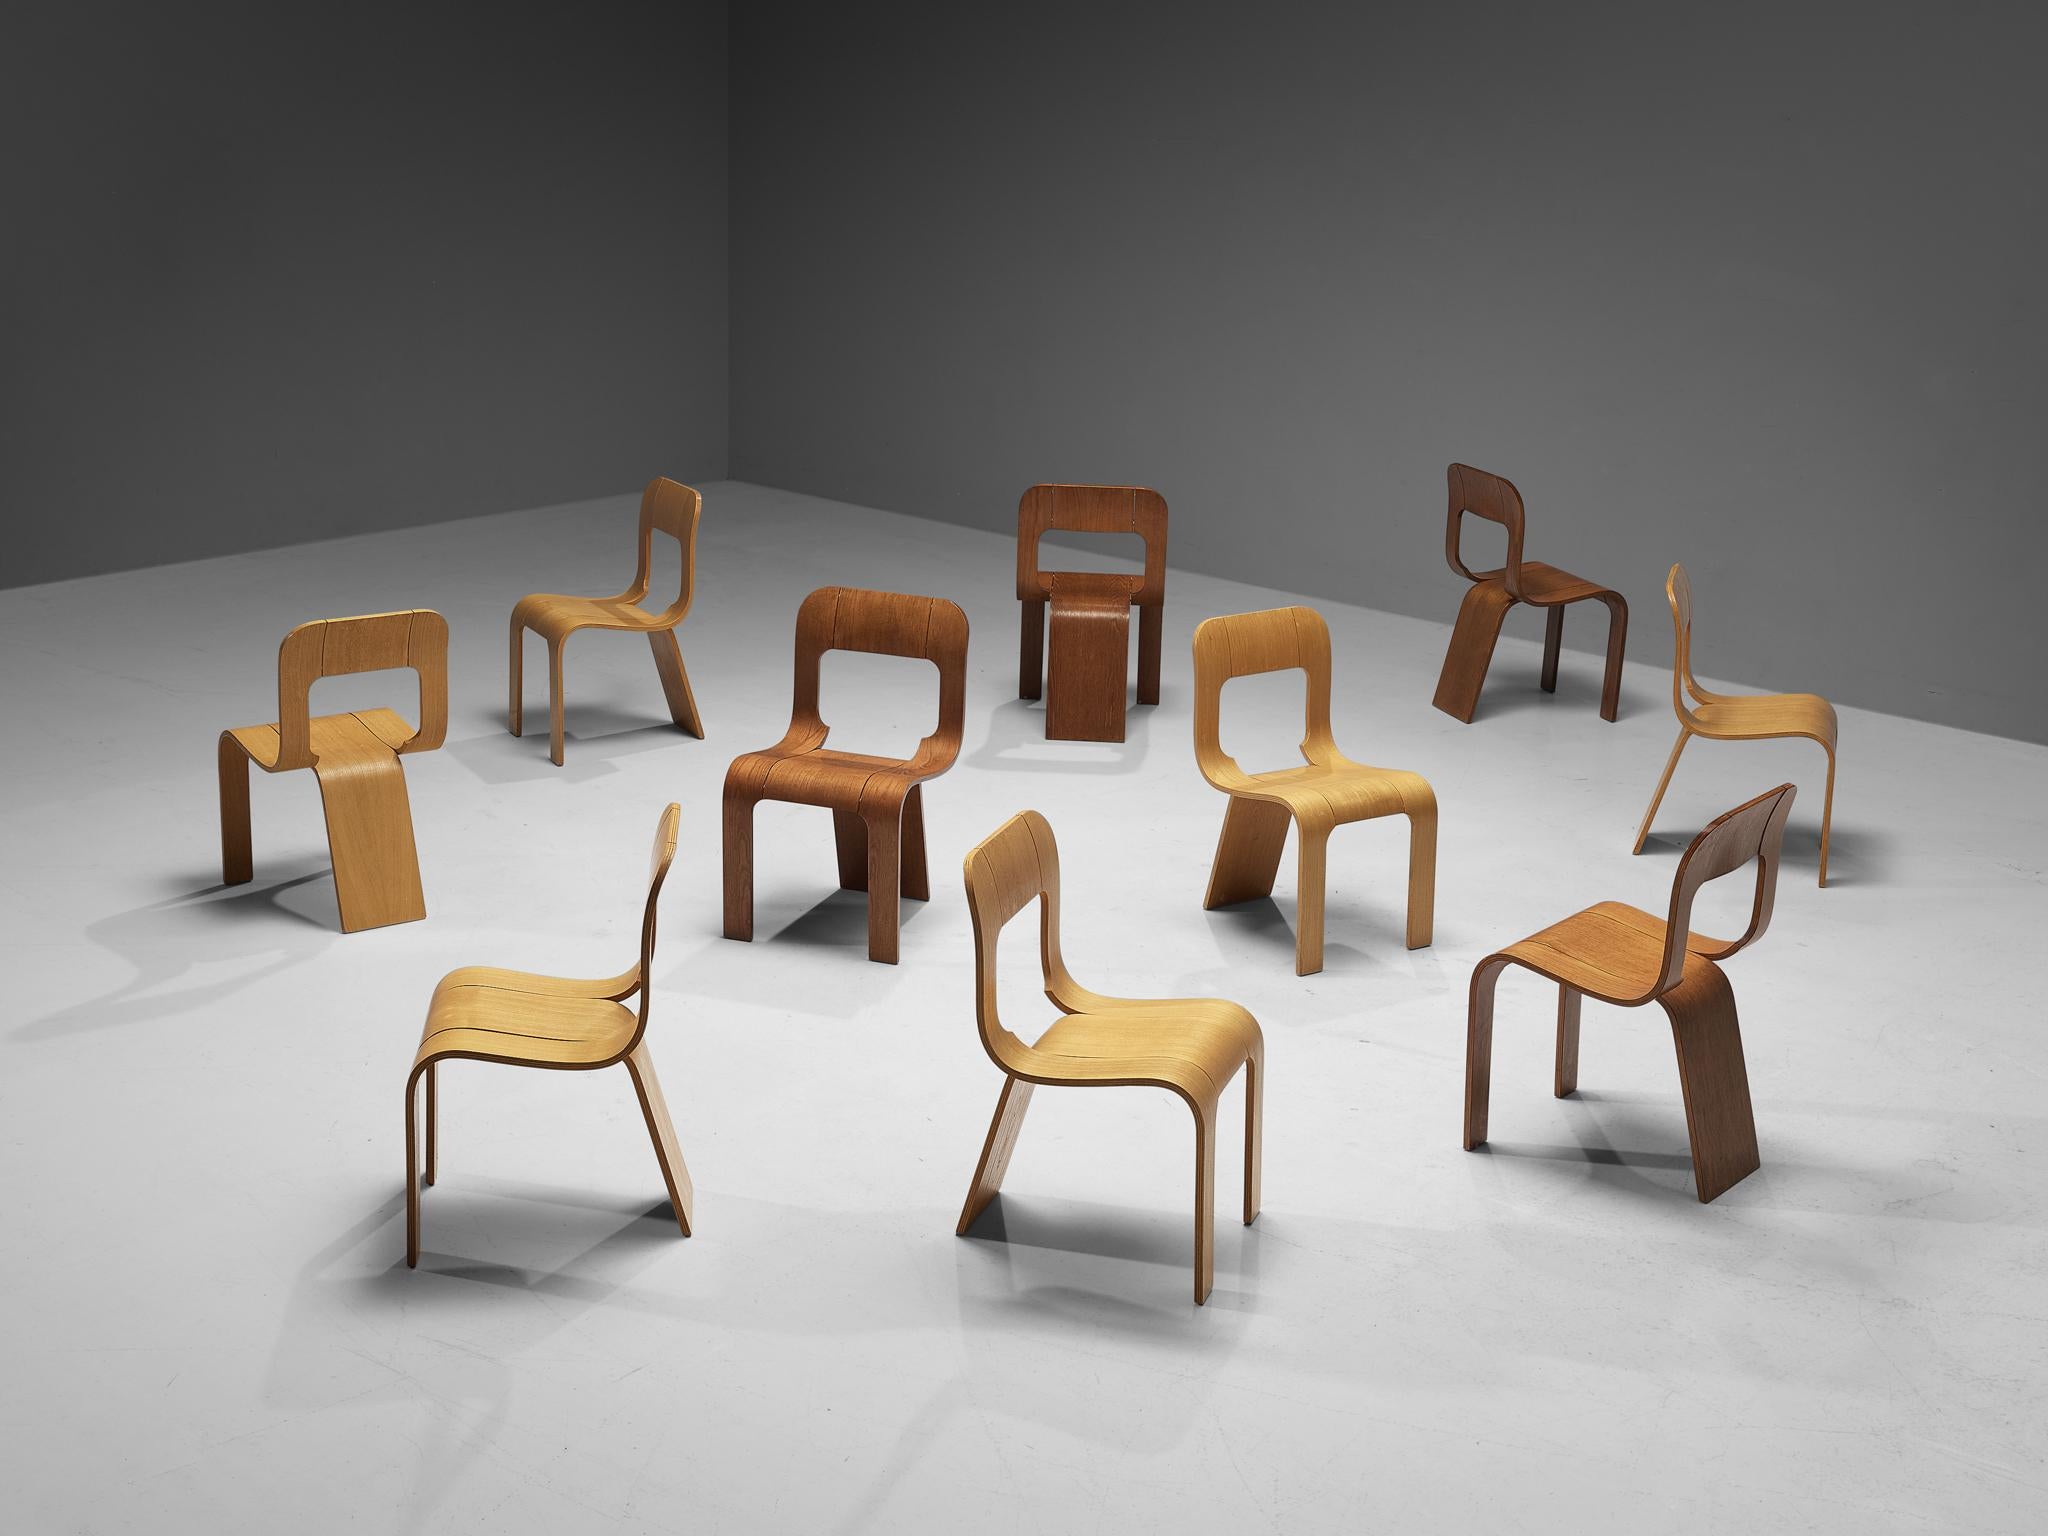 Gigi Sabadin for Stilwood, set of ten chairs, ash plywood, Italy, 1970s.

An inventive design by the Italian Gigi Sabadin, these chairs are made of bent ash plywood with a veneered finish. The organic design seems to be made out of one piece, which